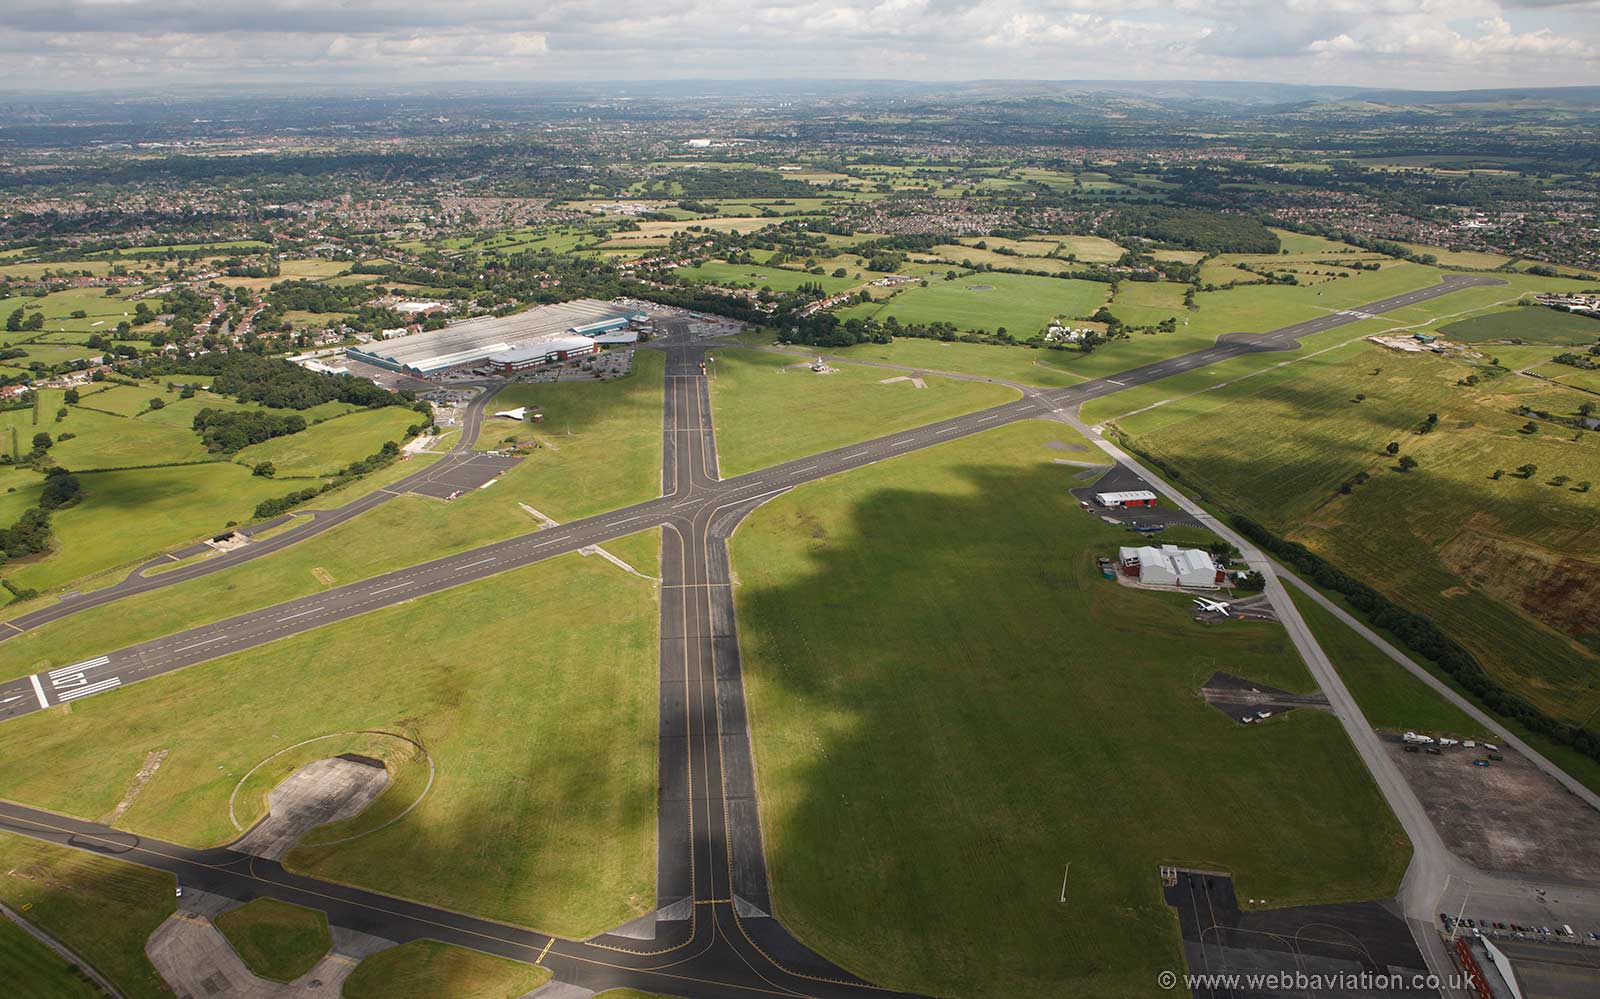 Woodford Aerodrome from the air